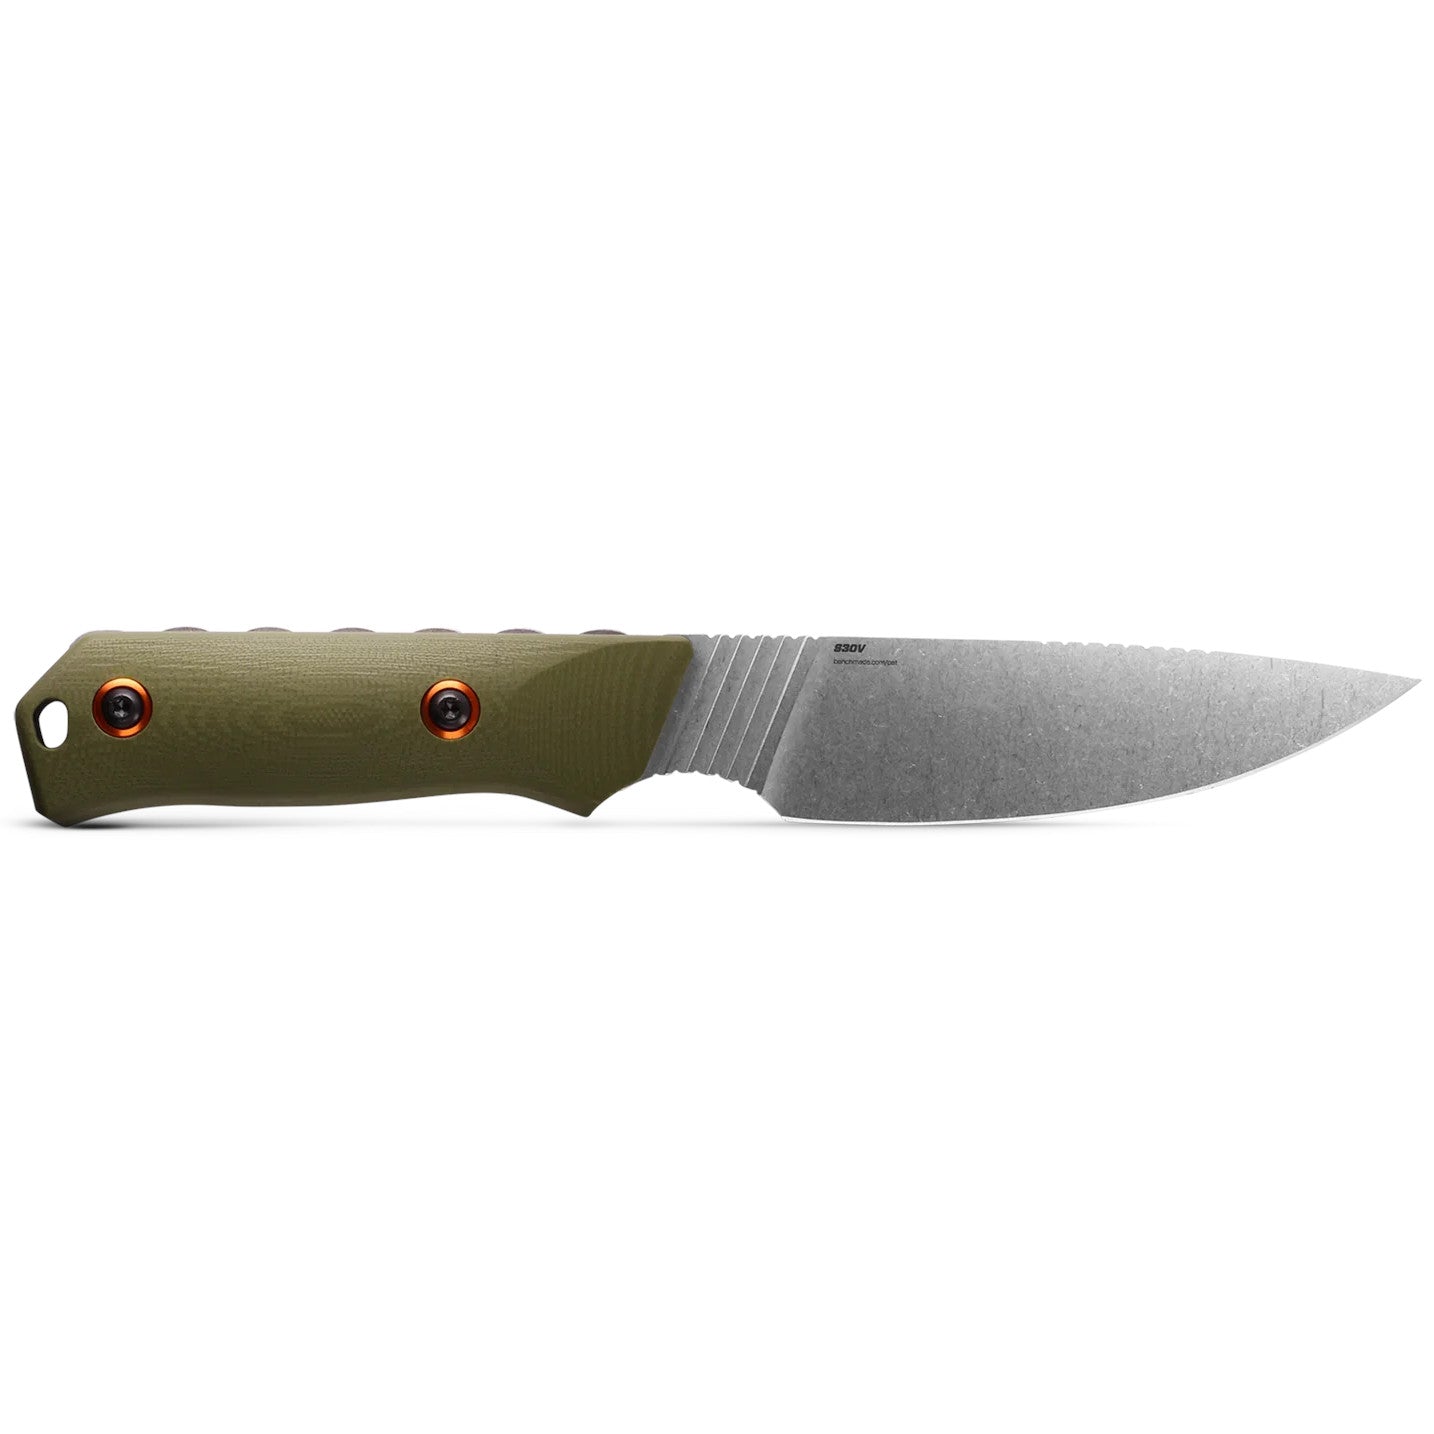 Benchmade 15600-01 Raghorn 4" CPM-S30V Fixed Blade Knife with OD Green G10 Handle and Boltaron Sheath